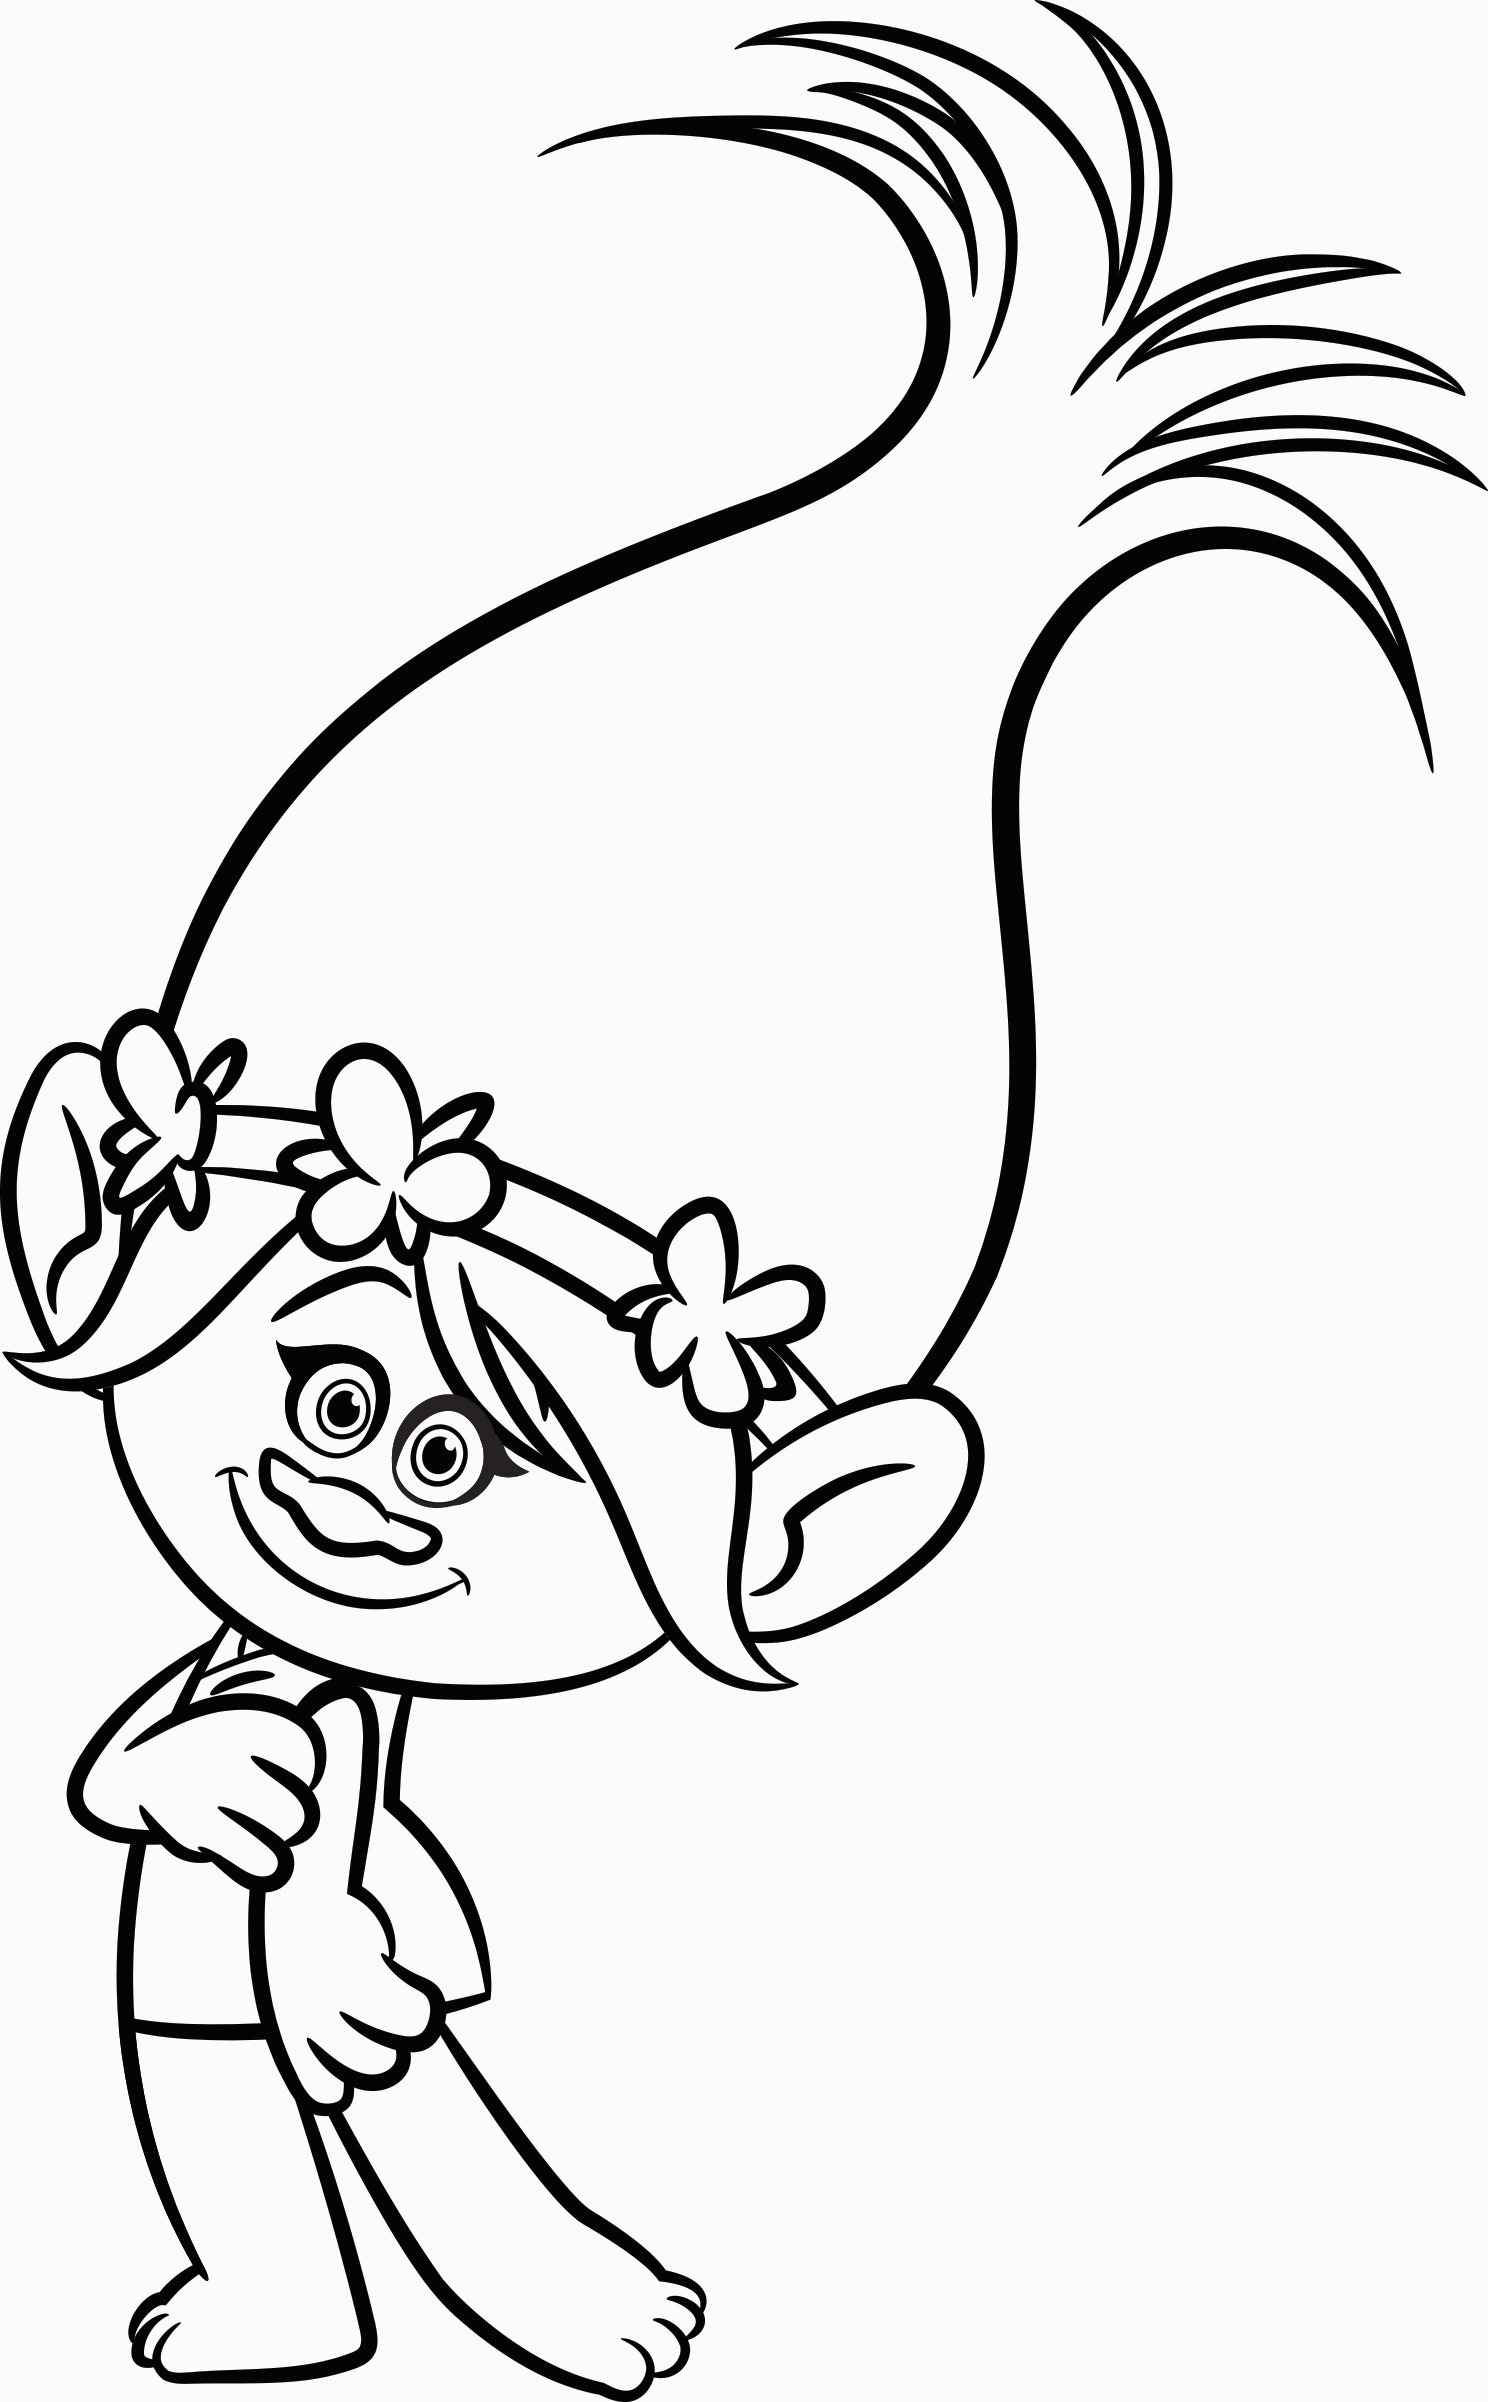 Trolls Movie Coloring Pages Trolls Movie Coloring Pages Best Coloring Pages For Kids For